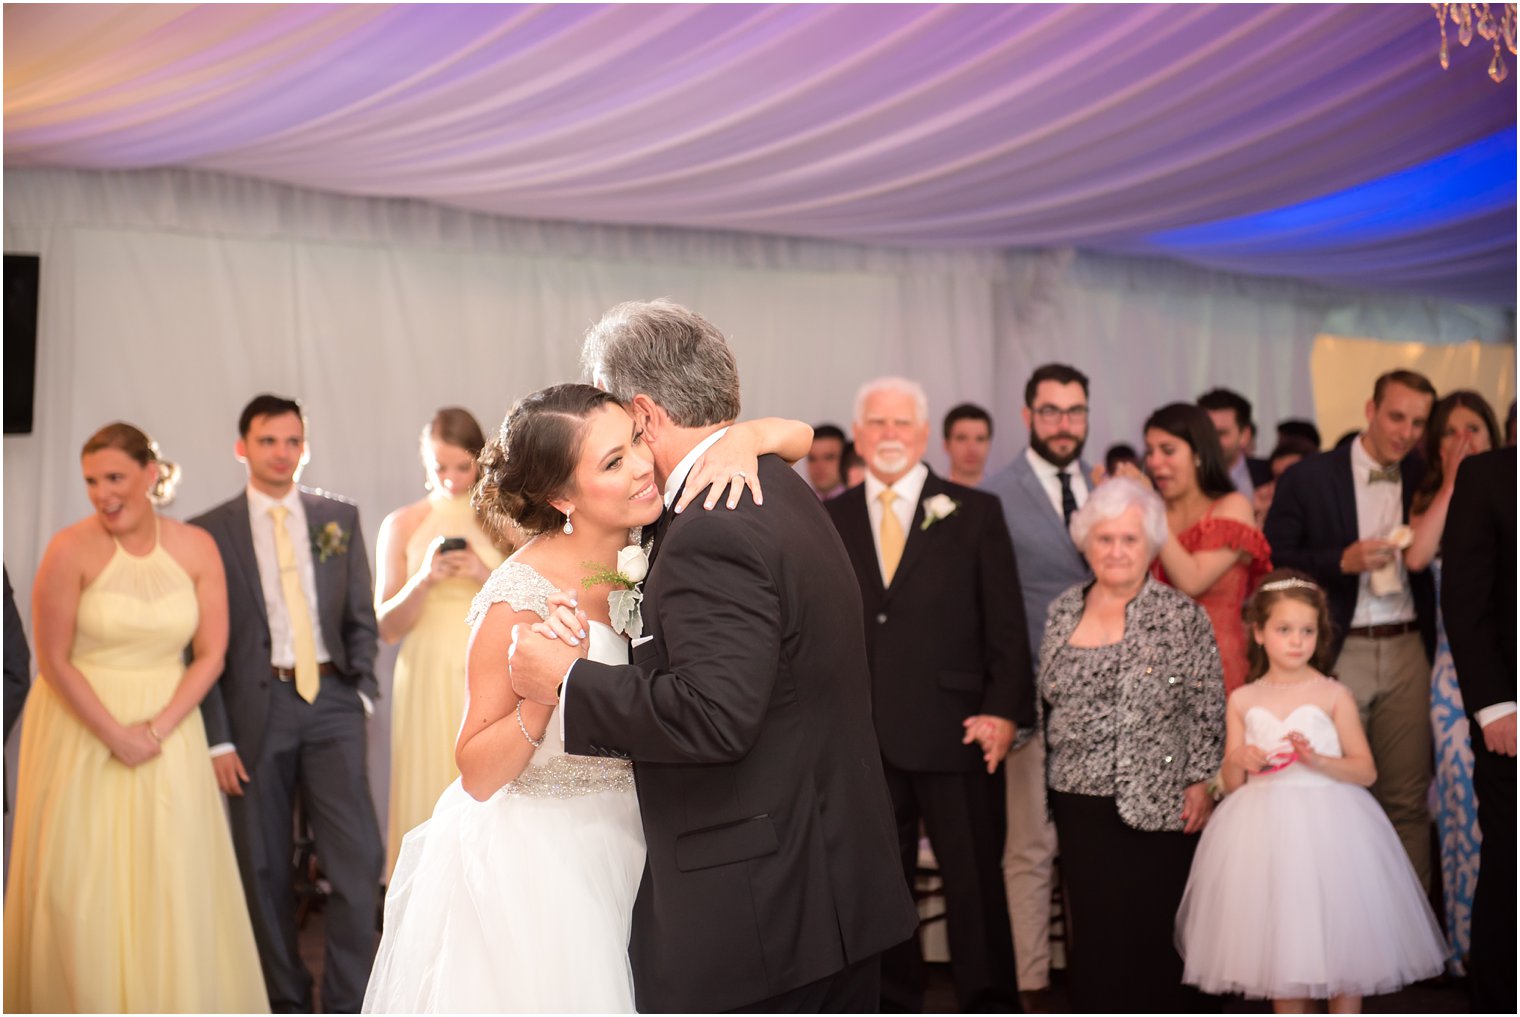 Bride and her father dancing at Windows on the Water at Frogbridge Wedding Reception